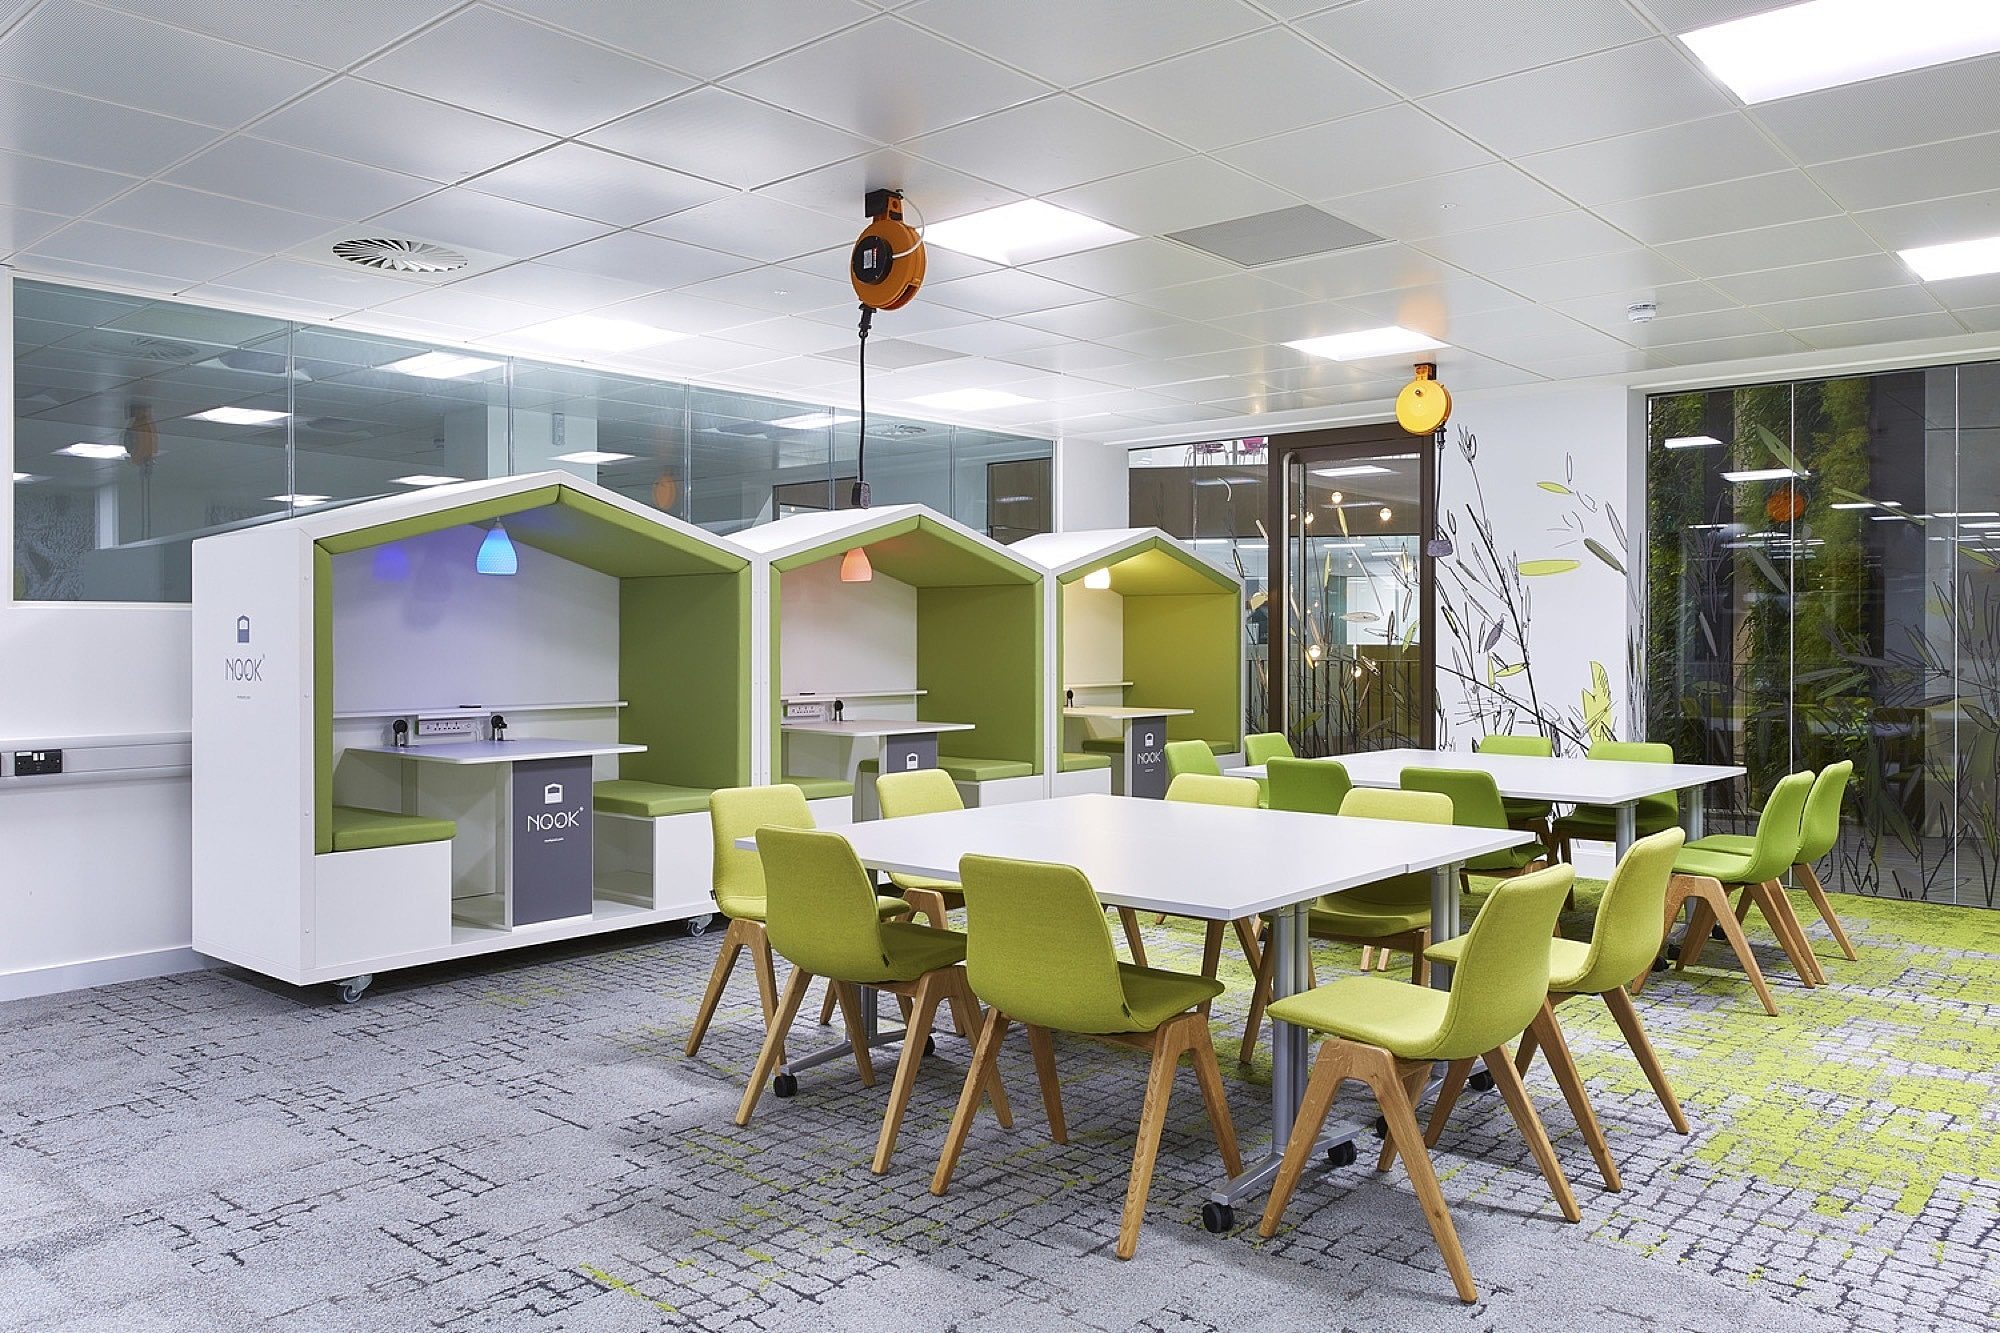 University of Bristol communal space fit out